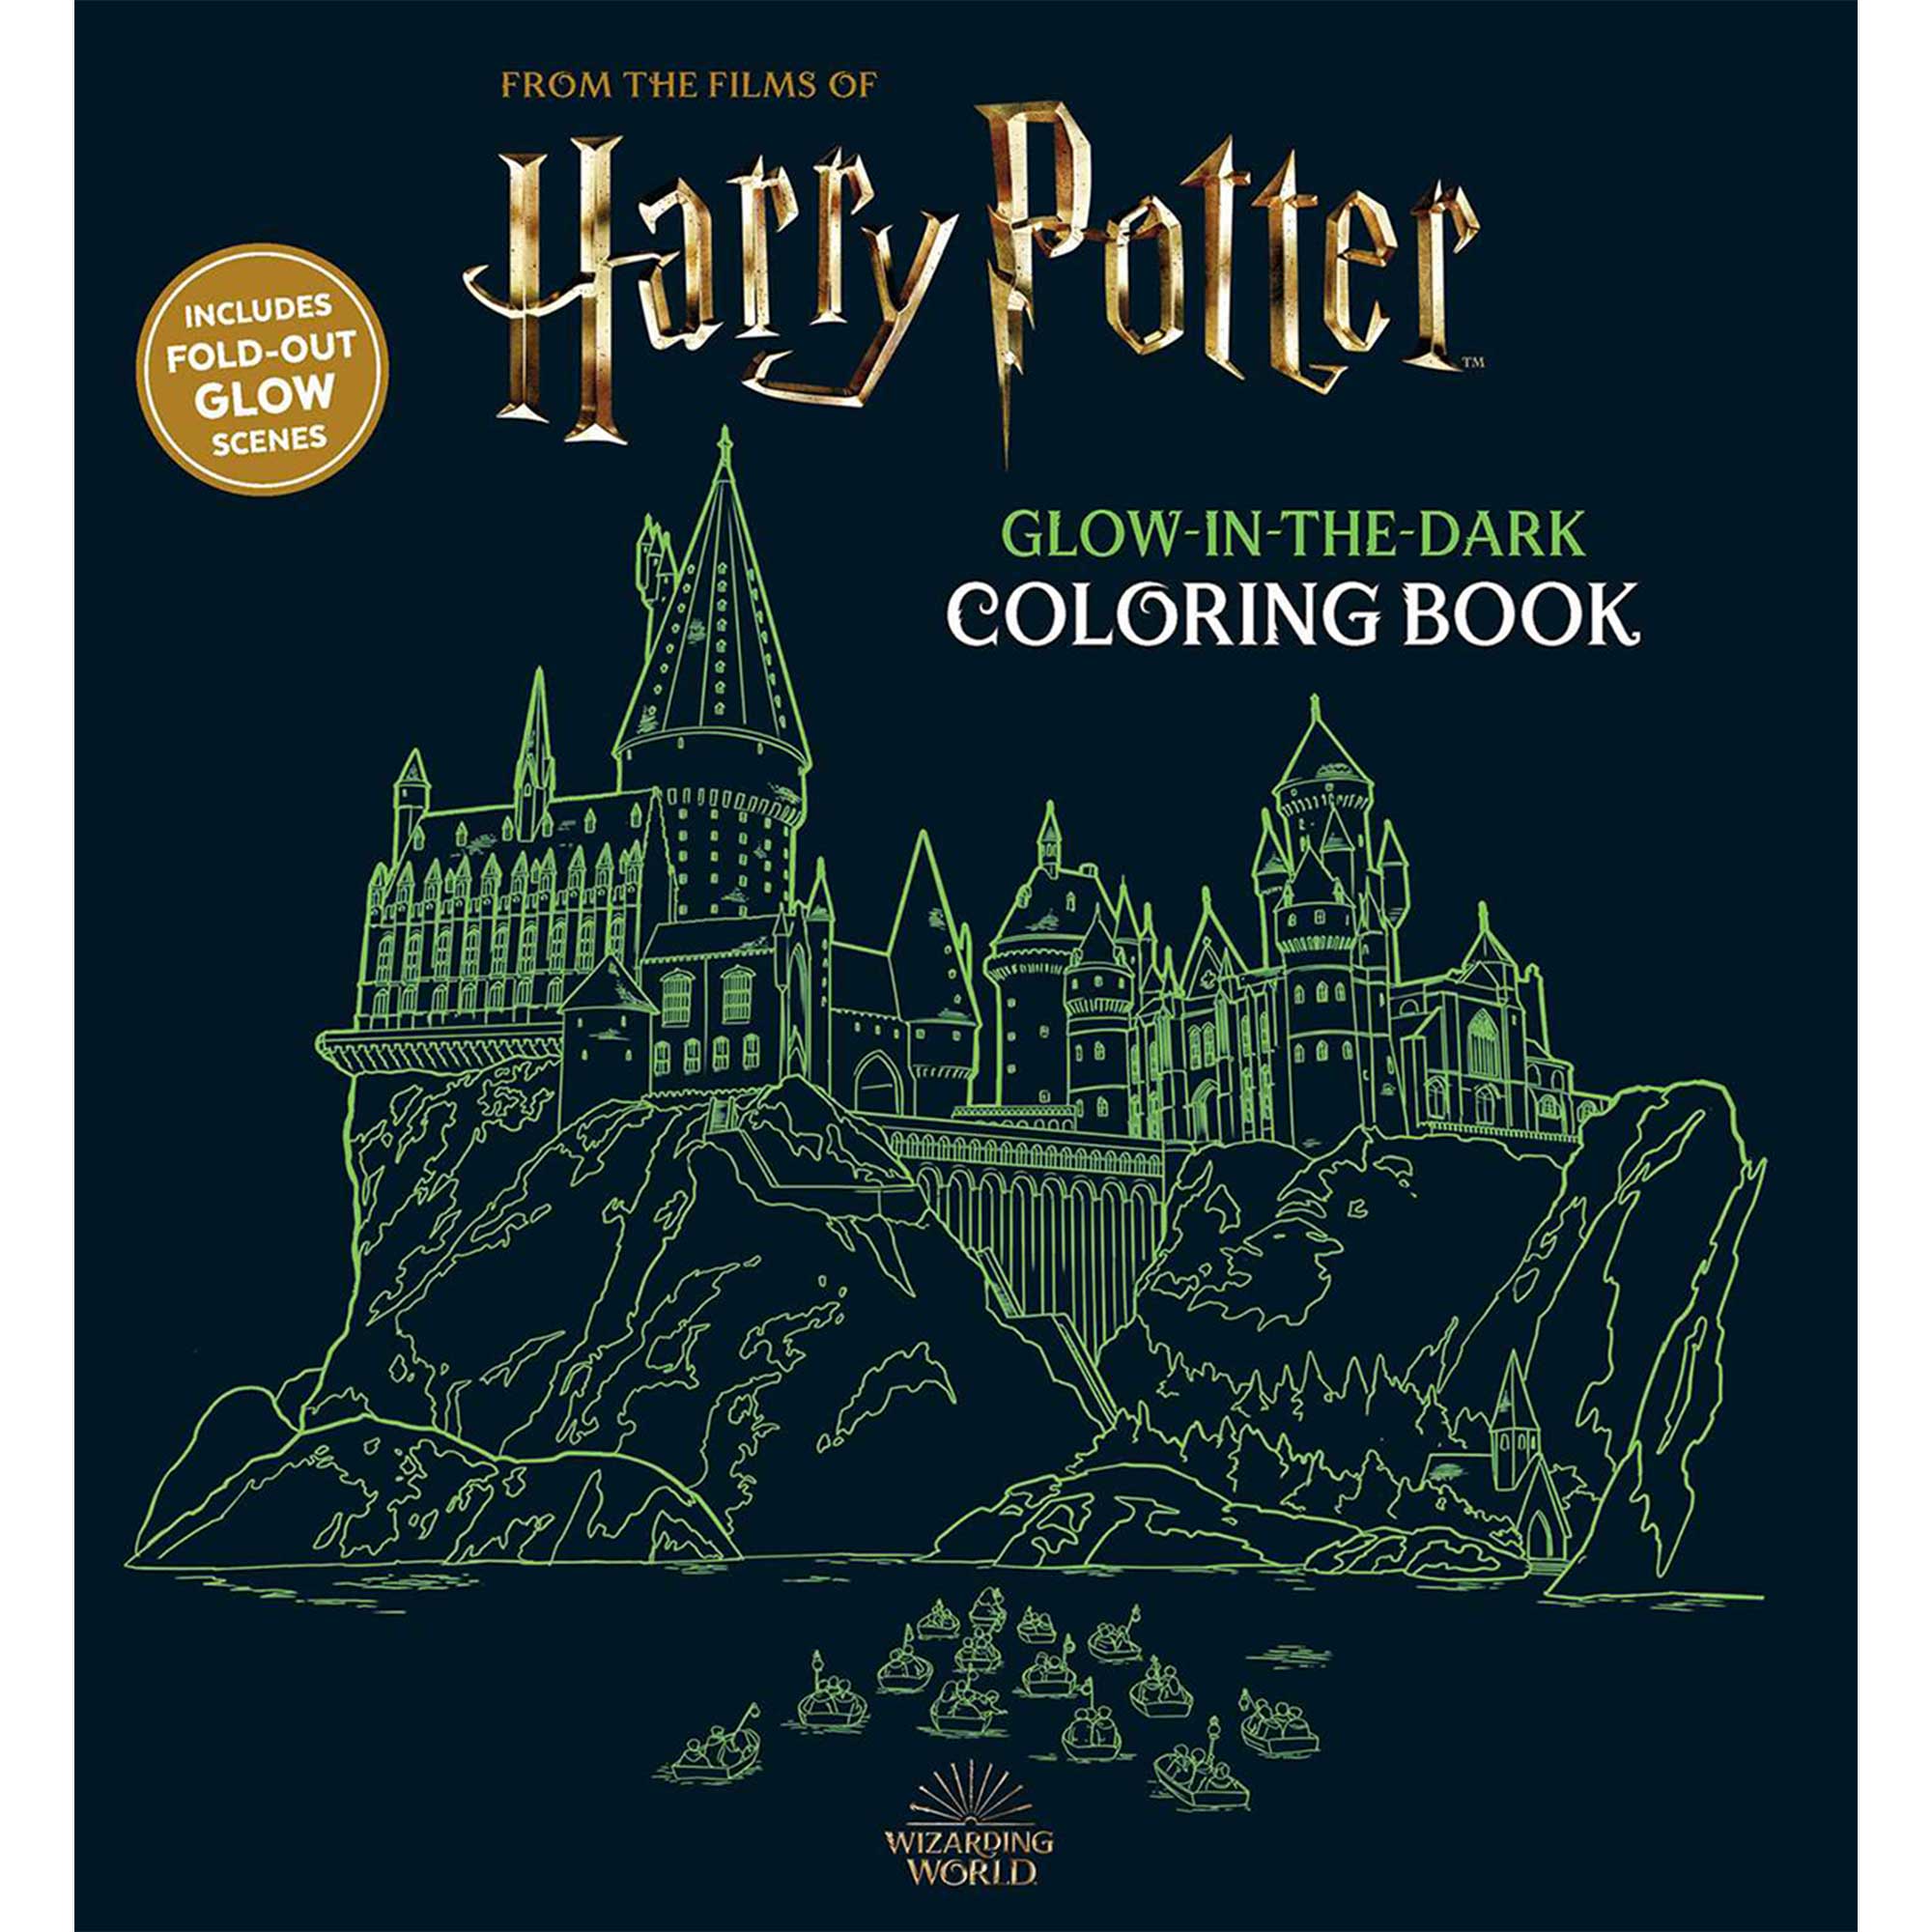 Harry Potter Glow-in-the-Dark Colouring Book